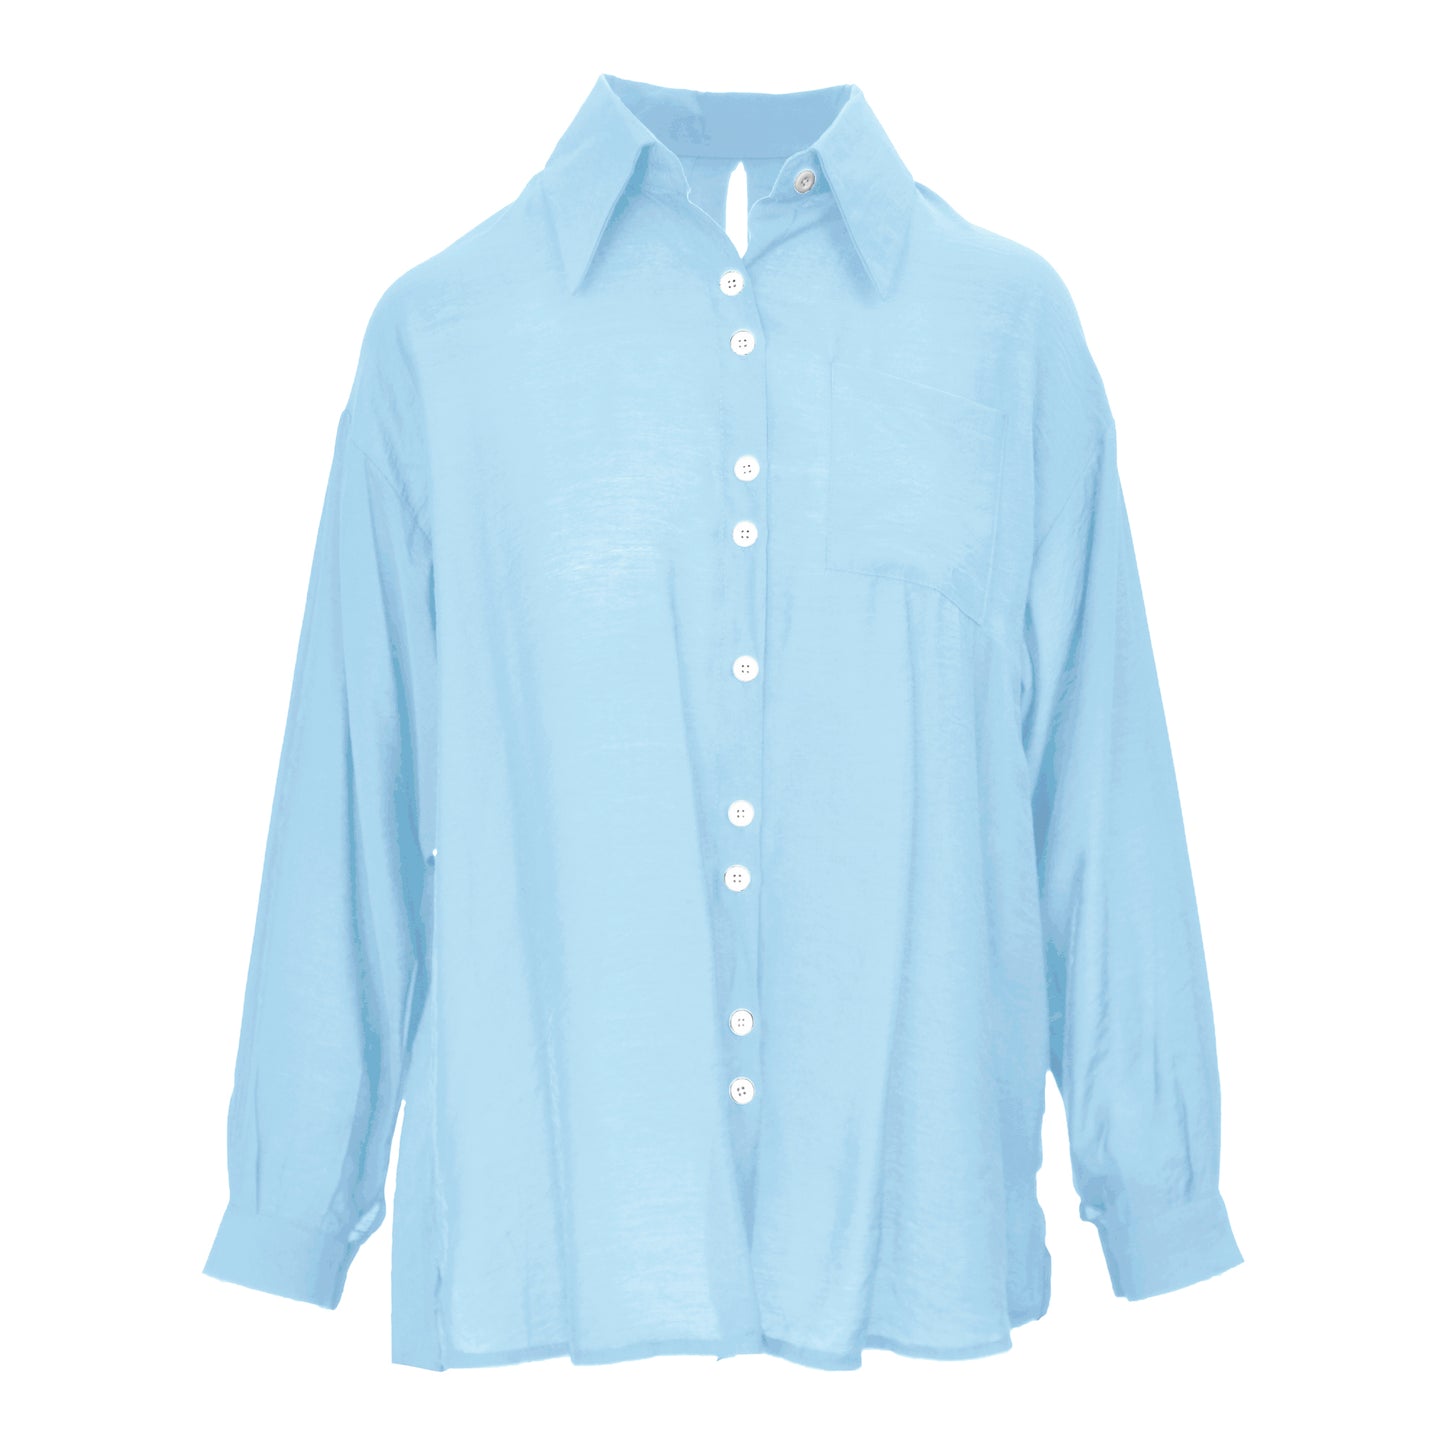 Open Back Tie Up Long Sleeve Shirts